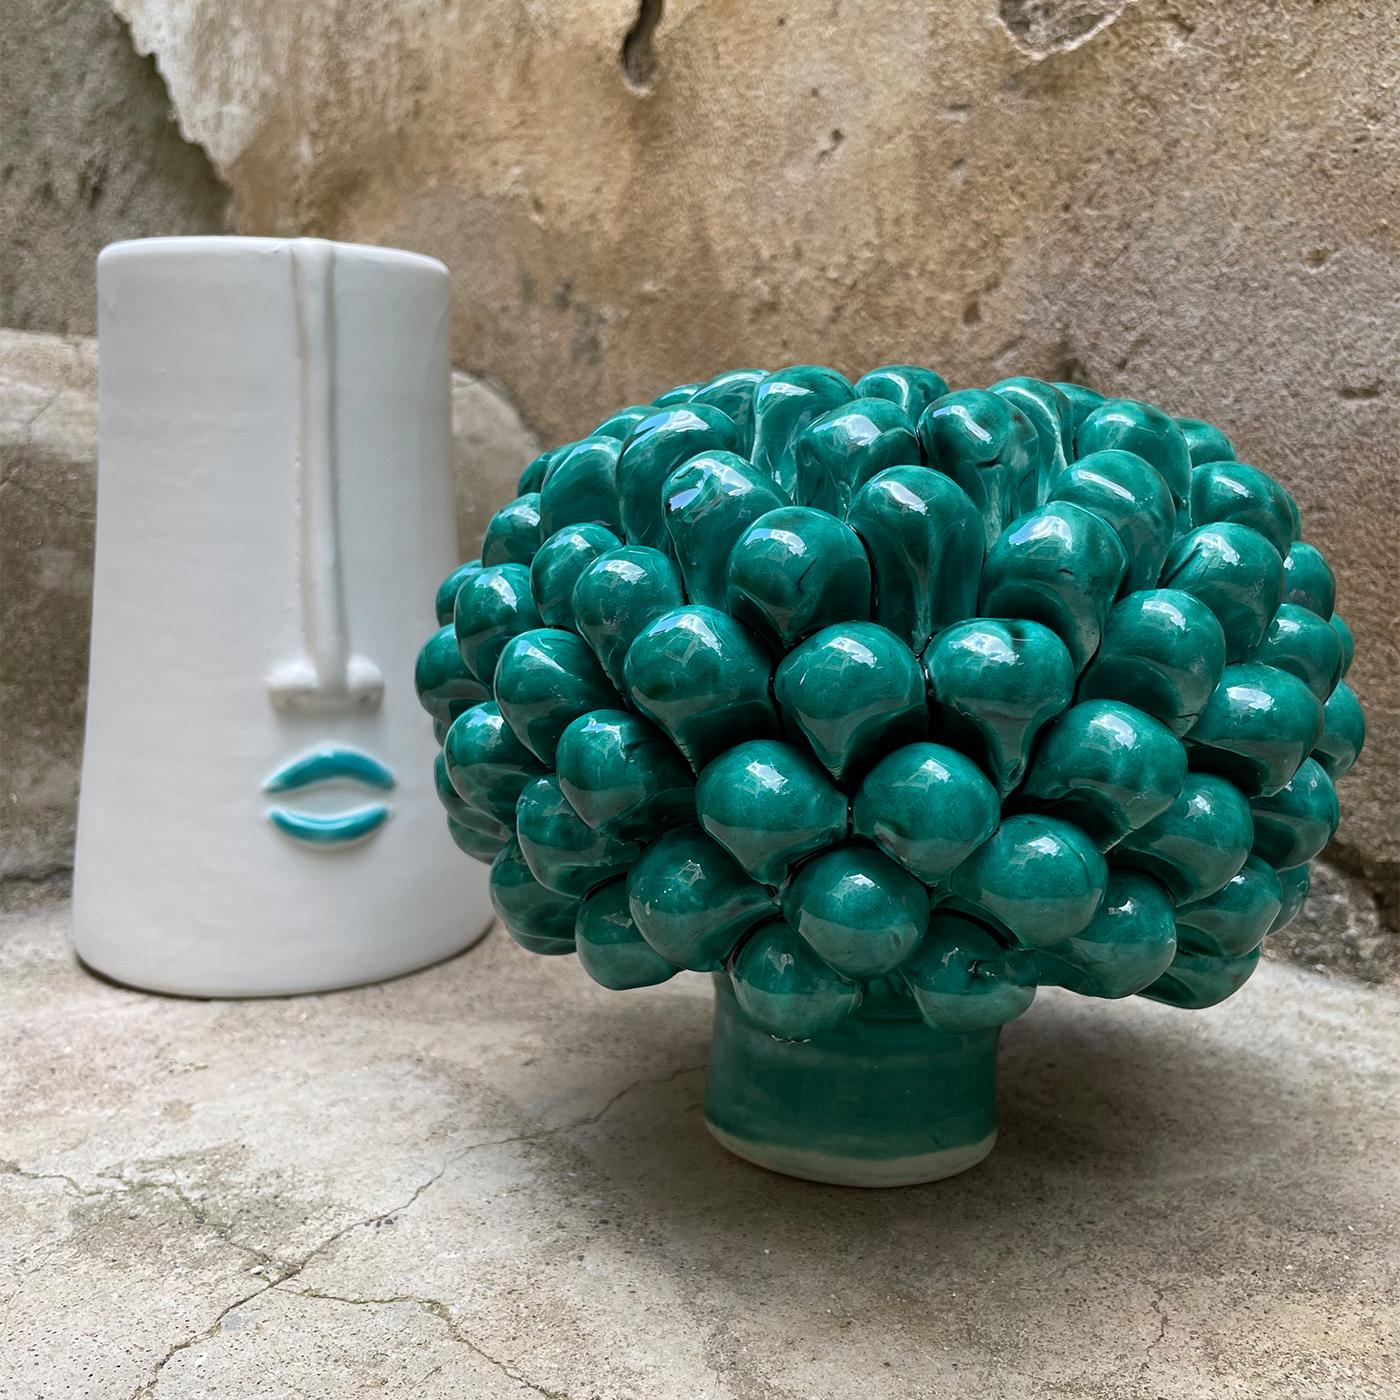 Superb as a centerpiece for an entryway console, this precious ceramic piece brims with romantic and sculptural charm. Anthropomorphic traits accent the central body, which comes topped by a stunning lid in the shape of a vivid green pine cone.